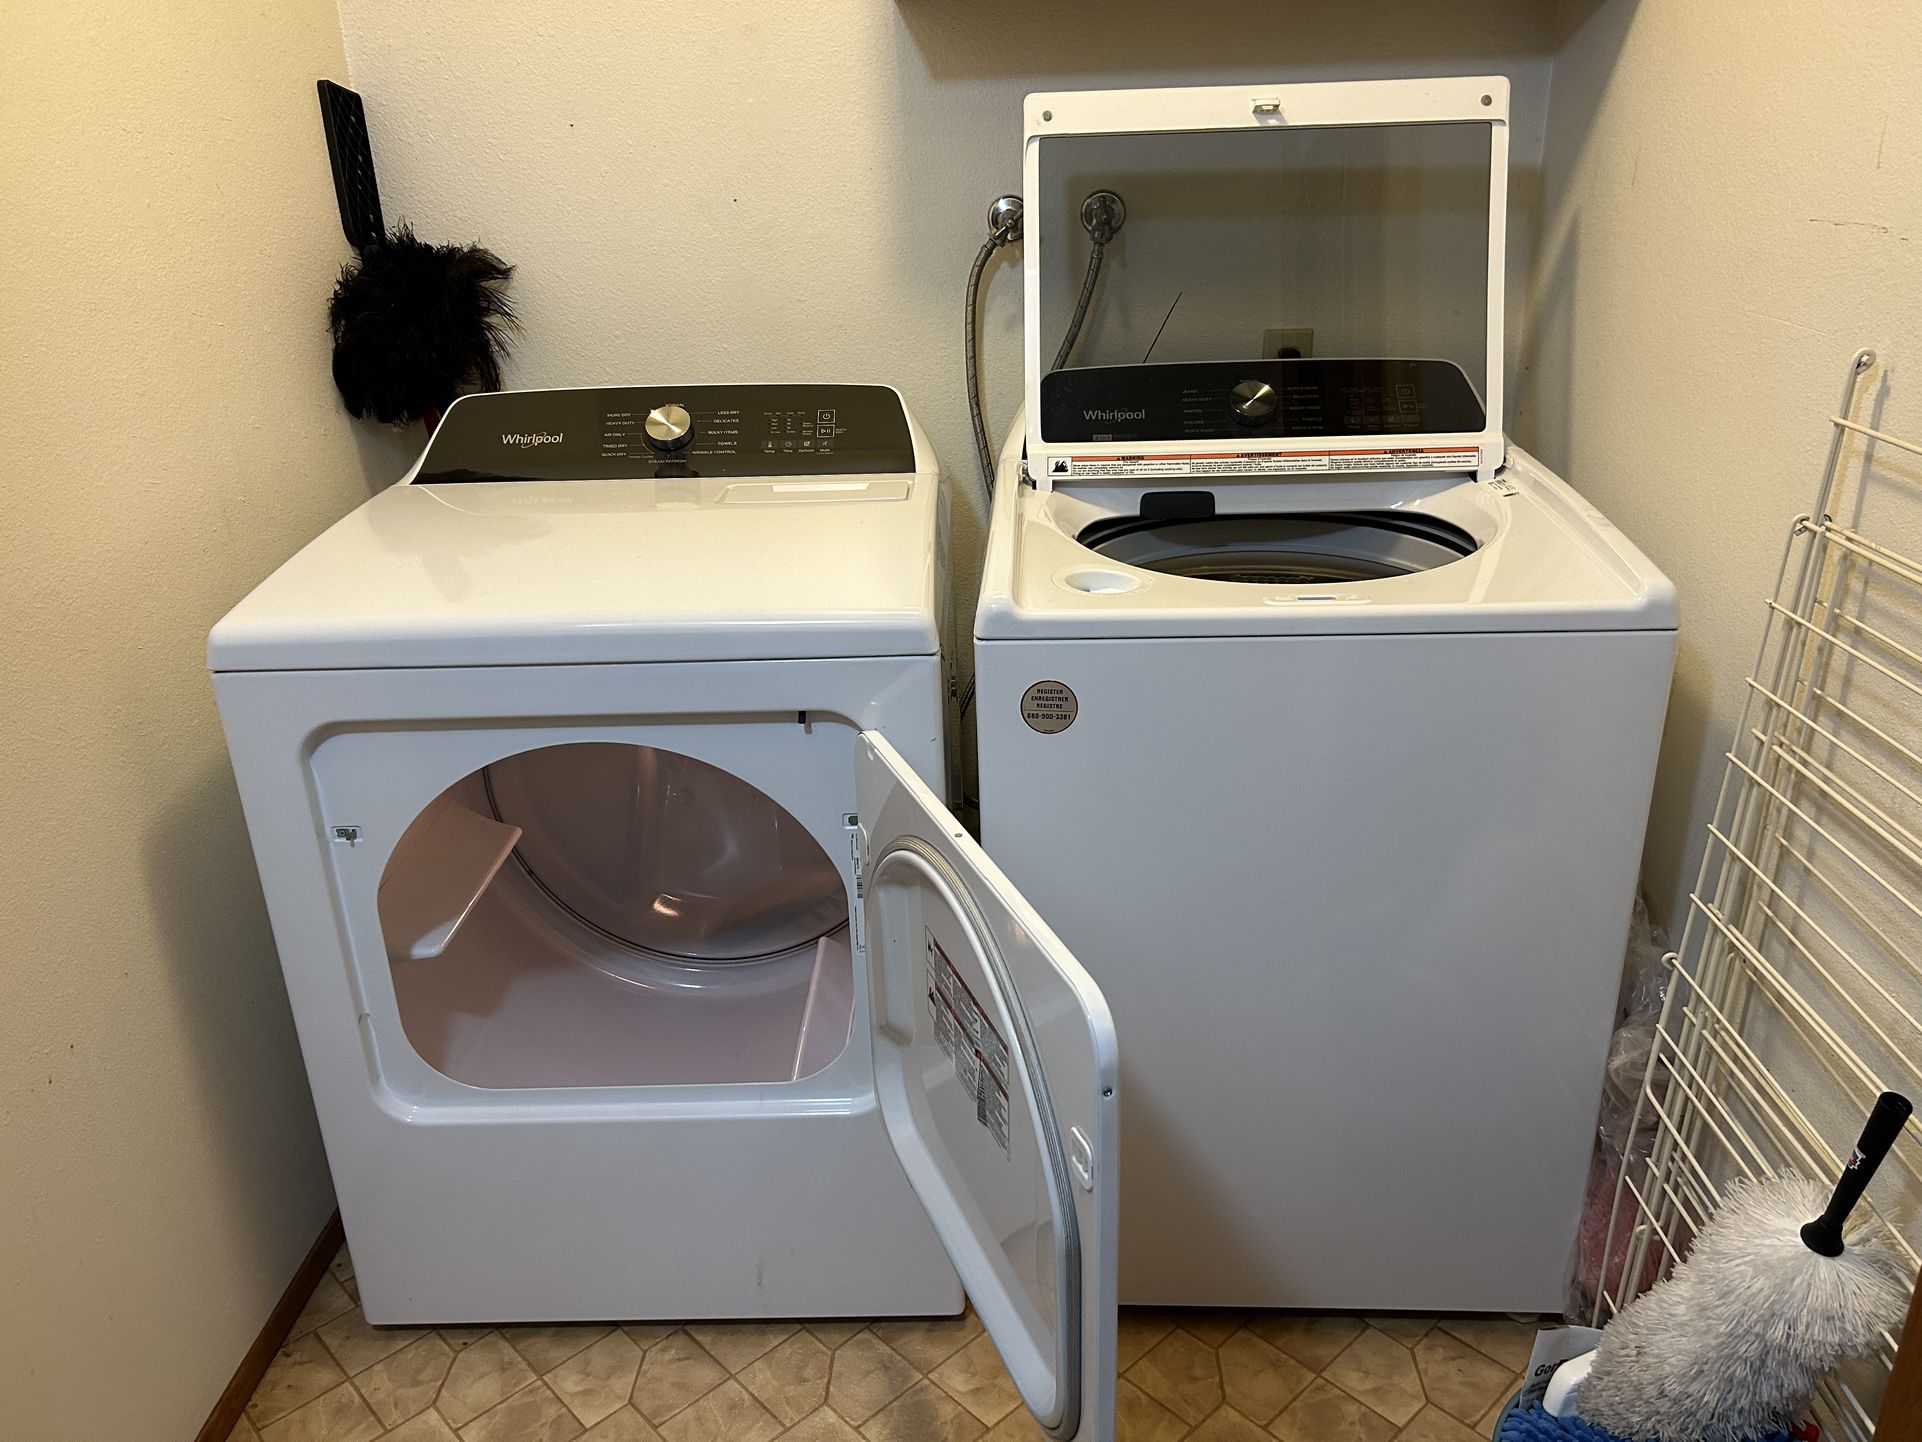 Whirlpool Washer & Dryer - New In 2022